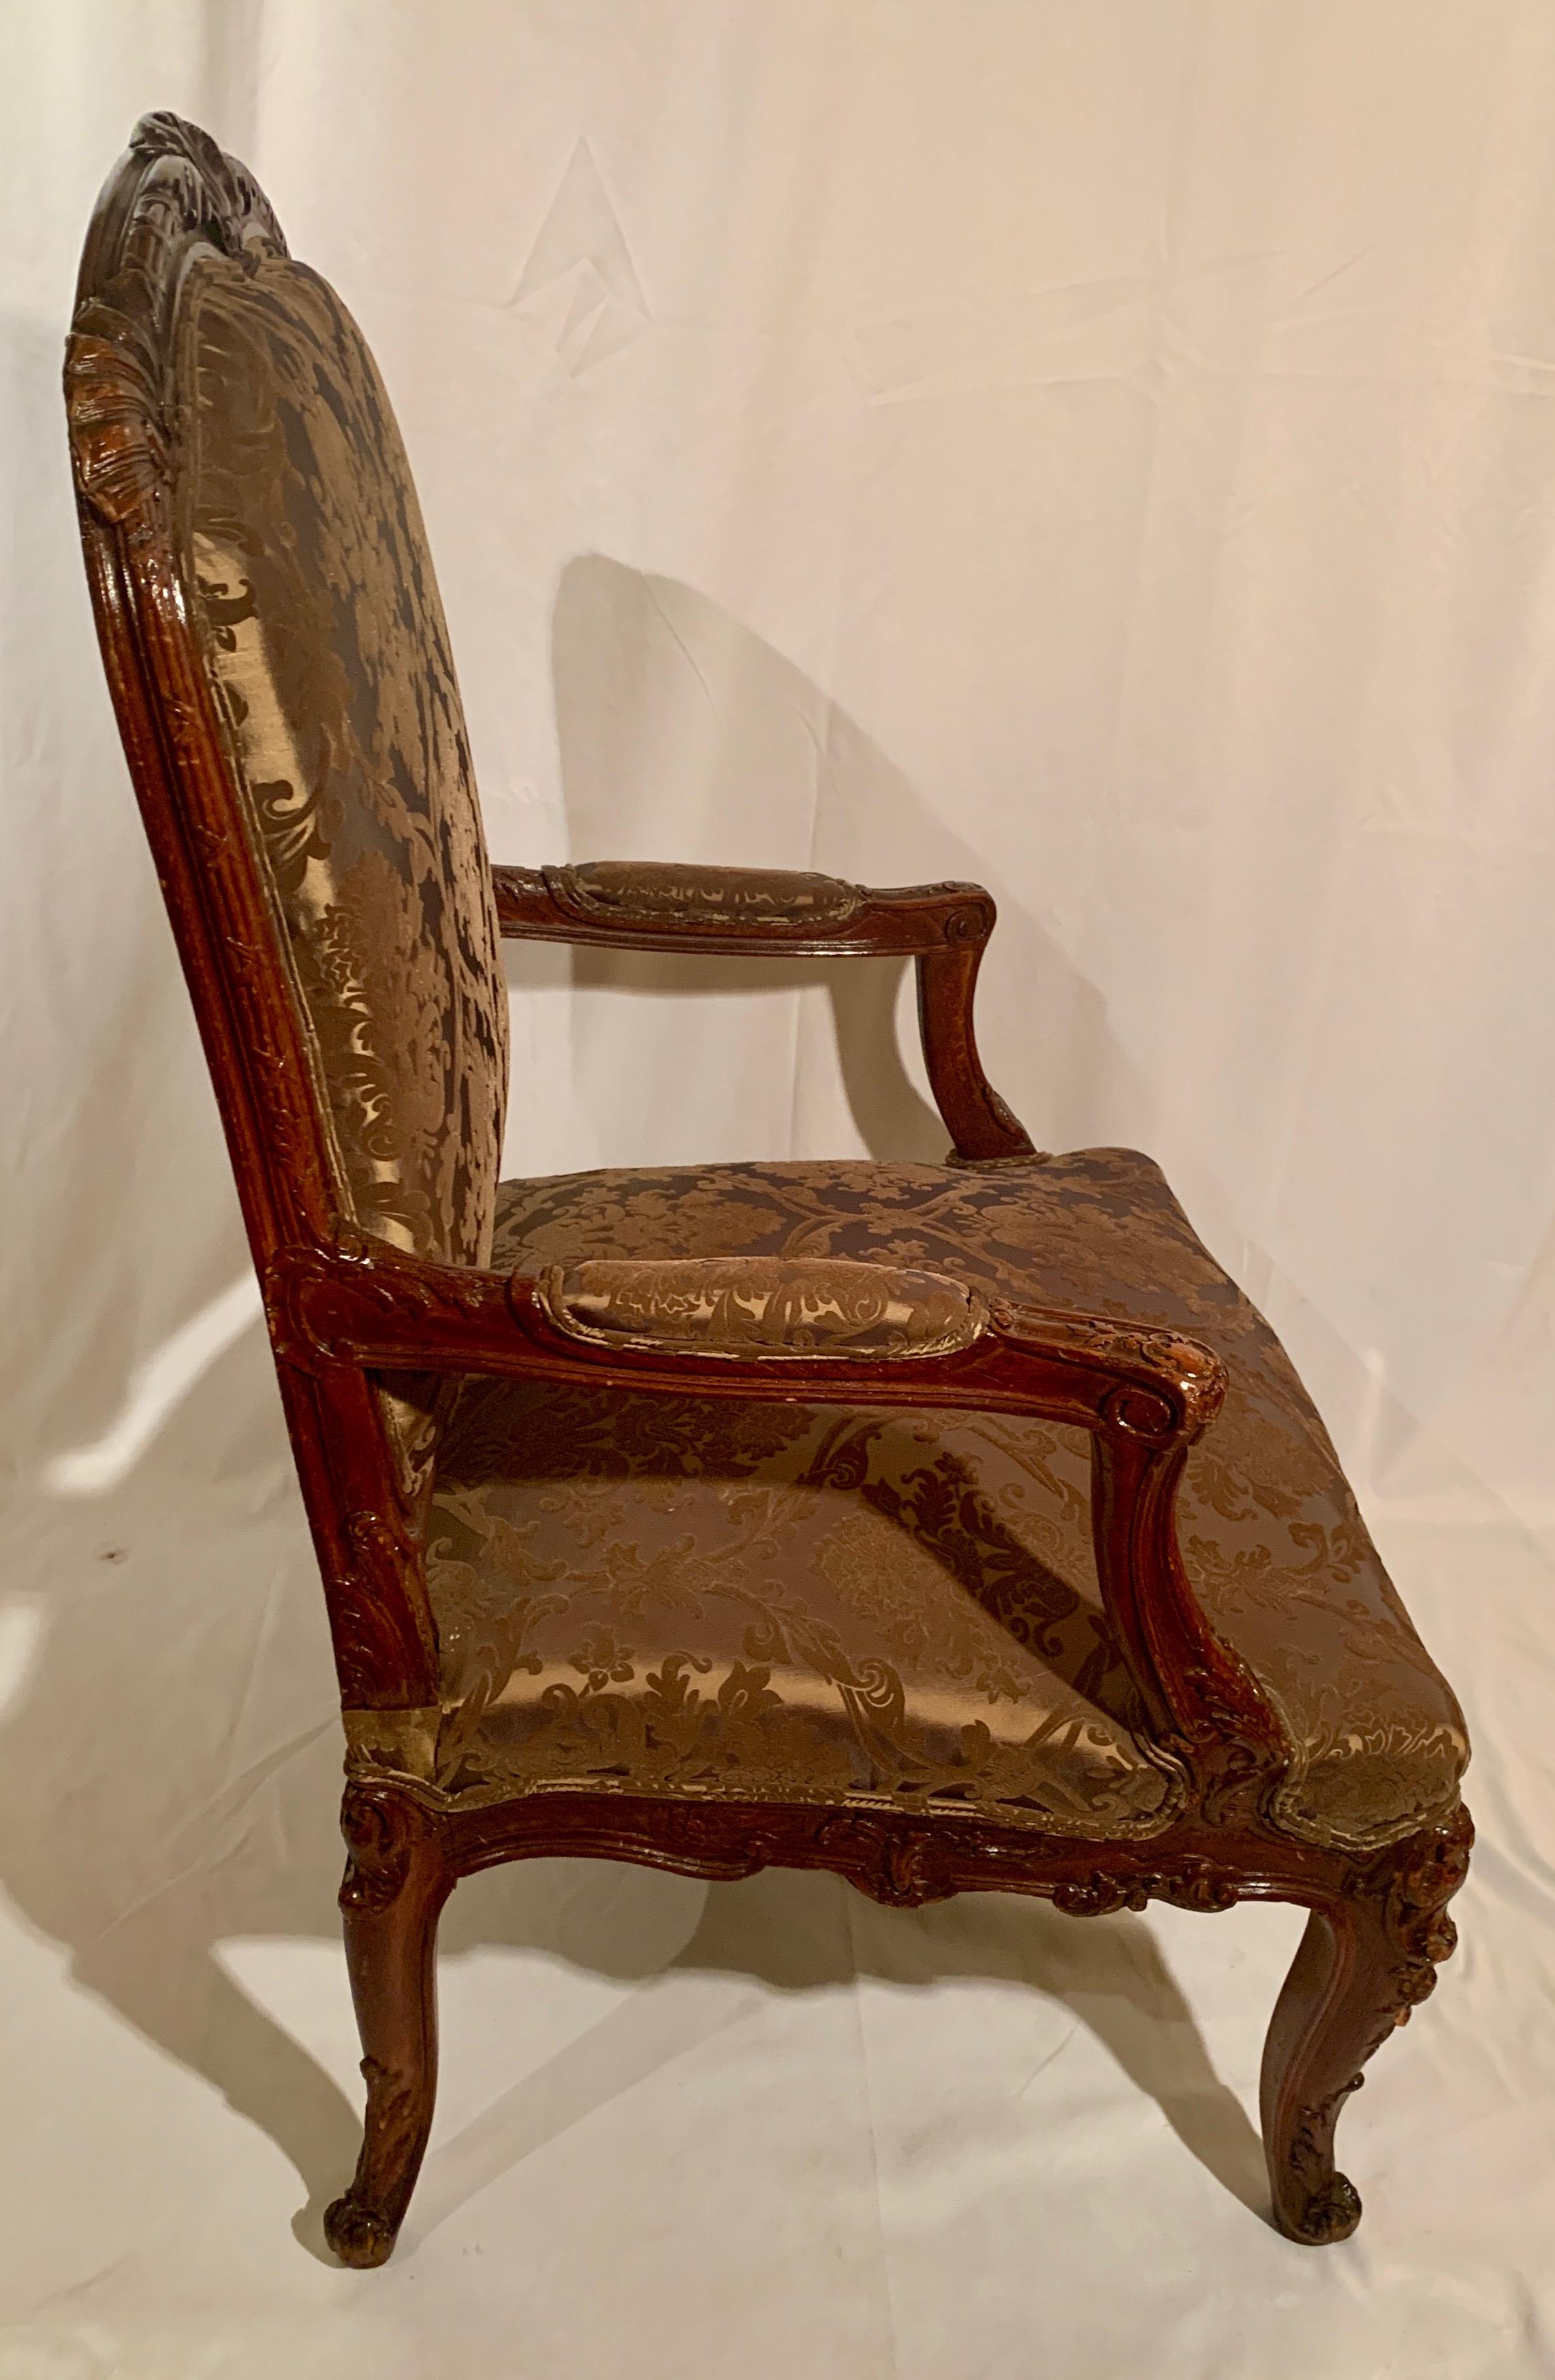 Pair of antique large size French armchairs, circa 1880.
 